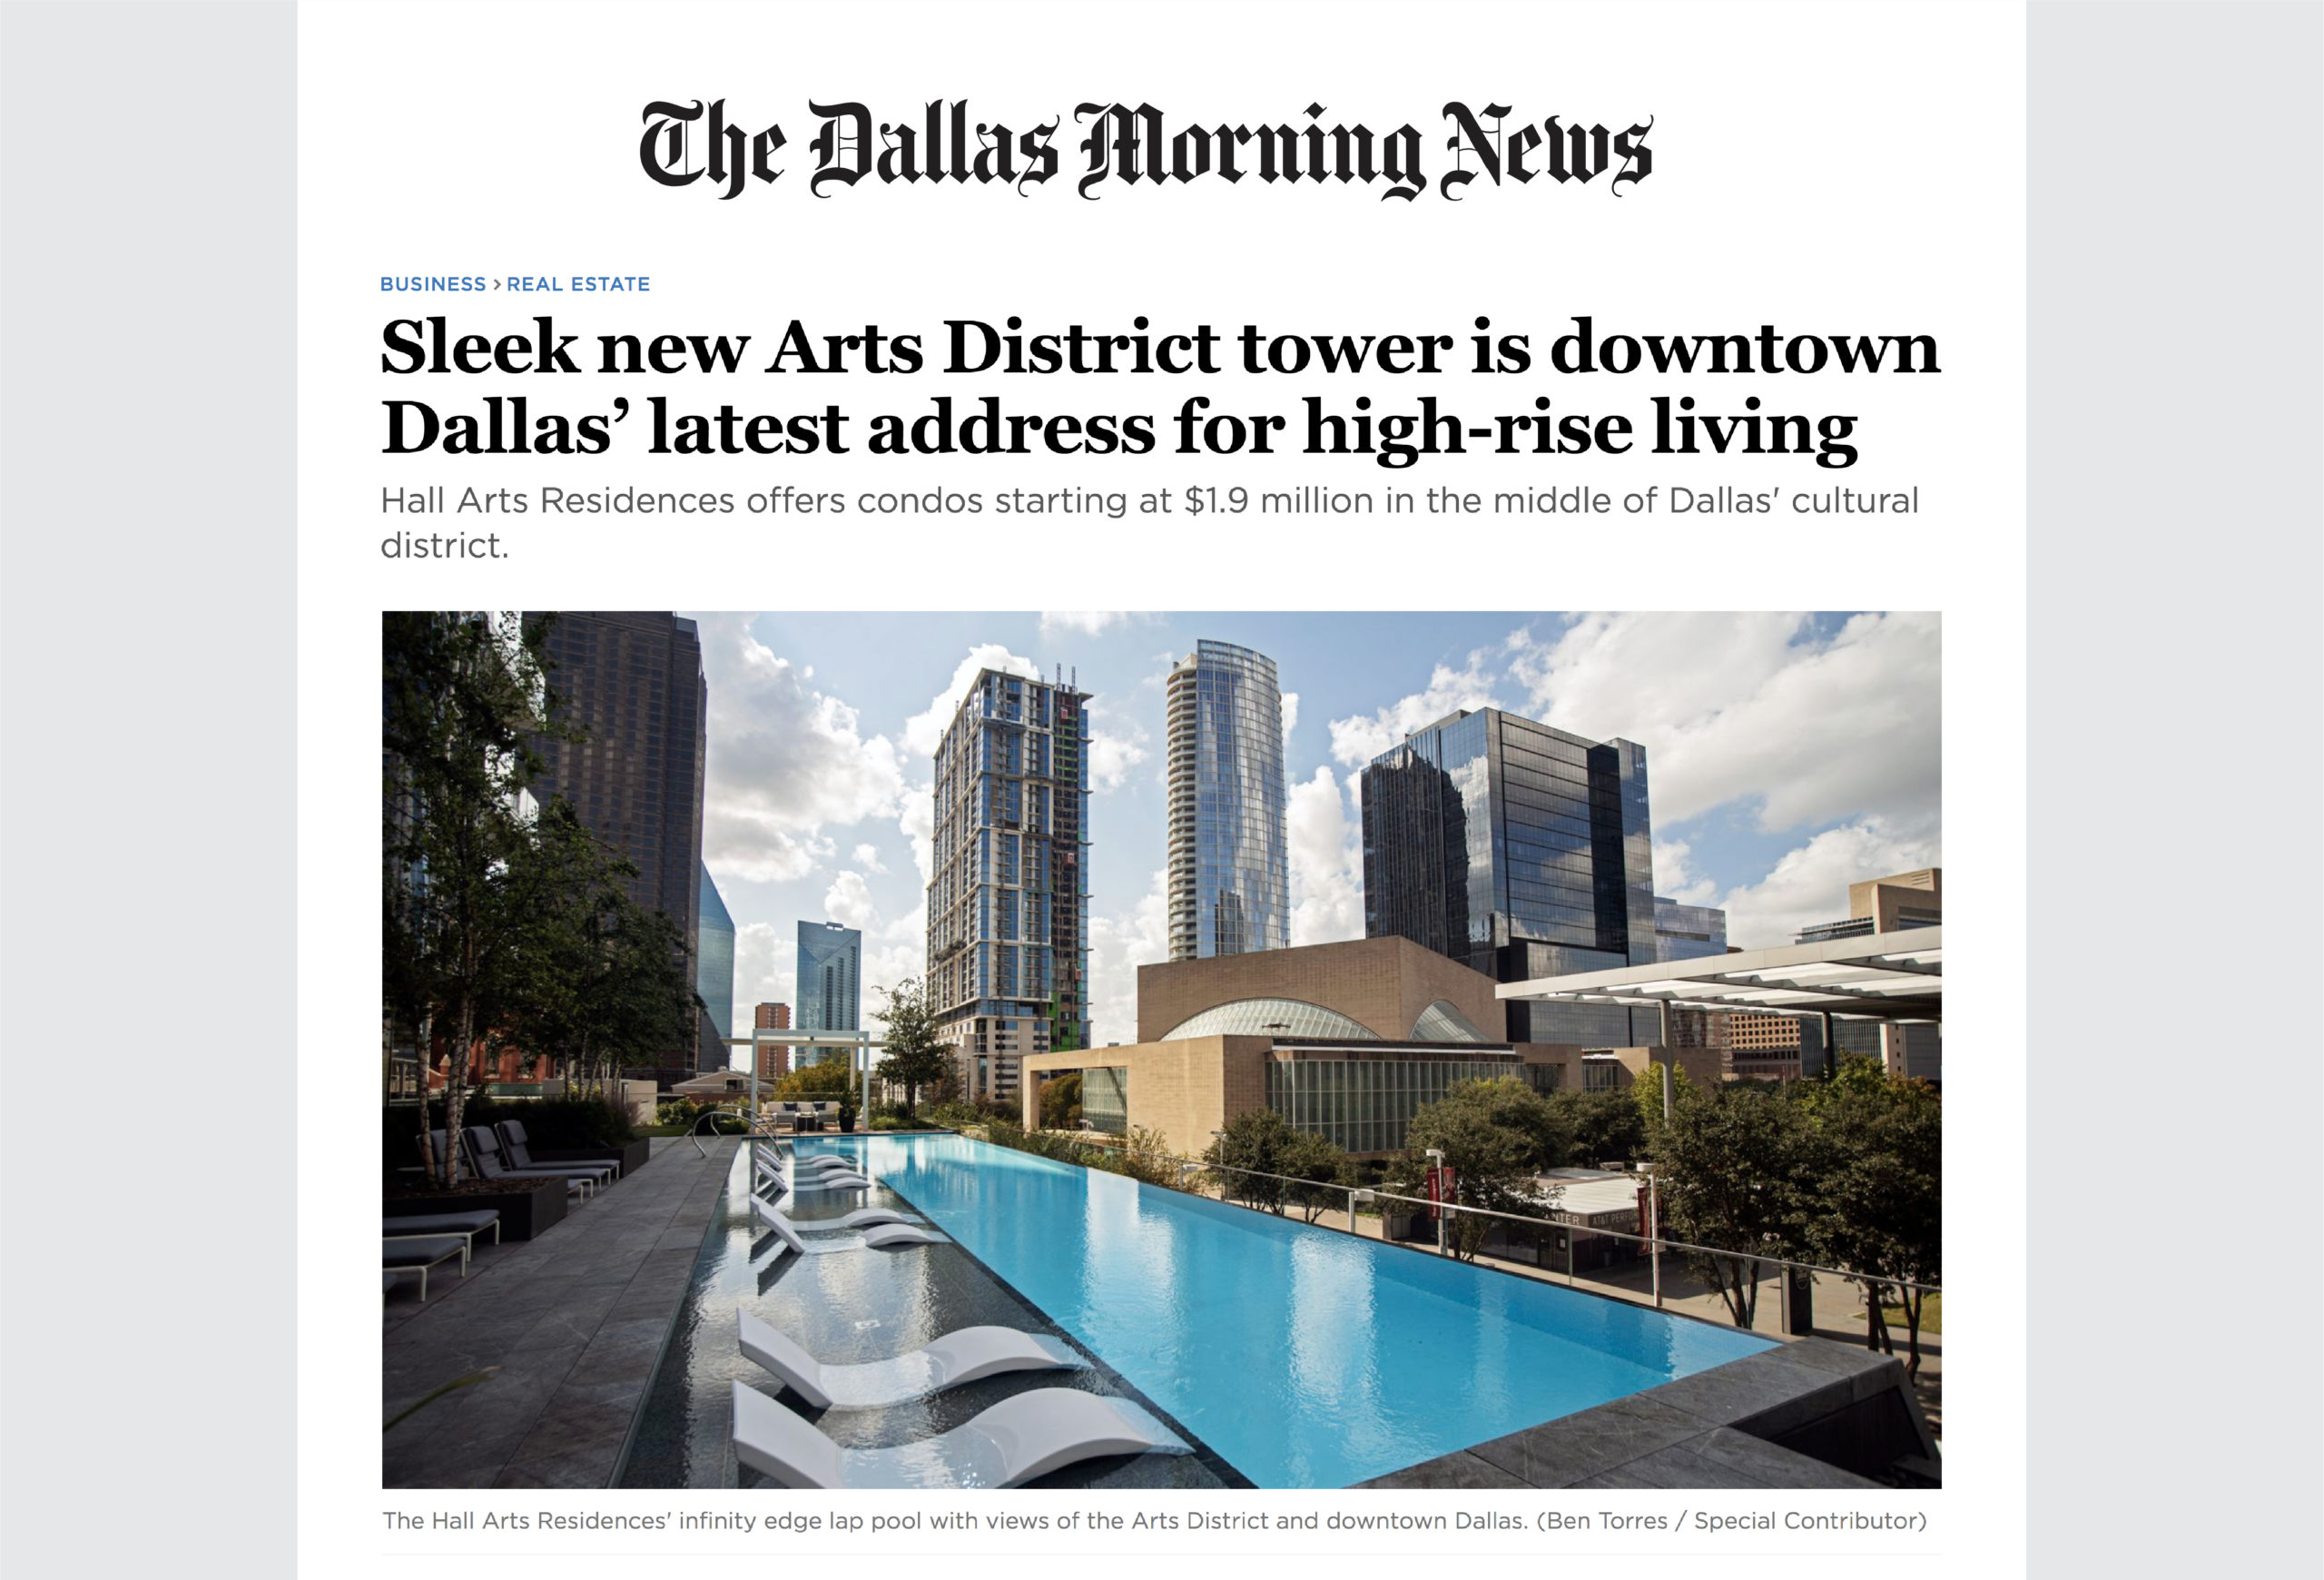 The Dallas Morning News article about Hall Arts Residences.